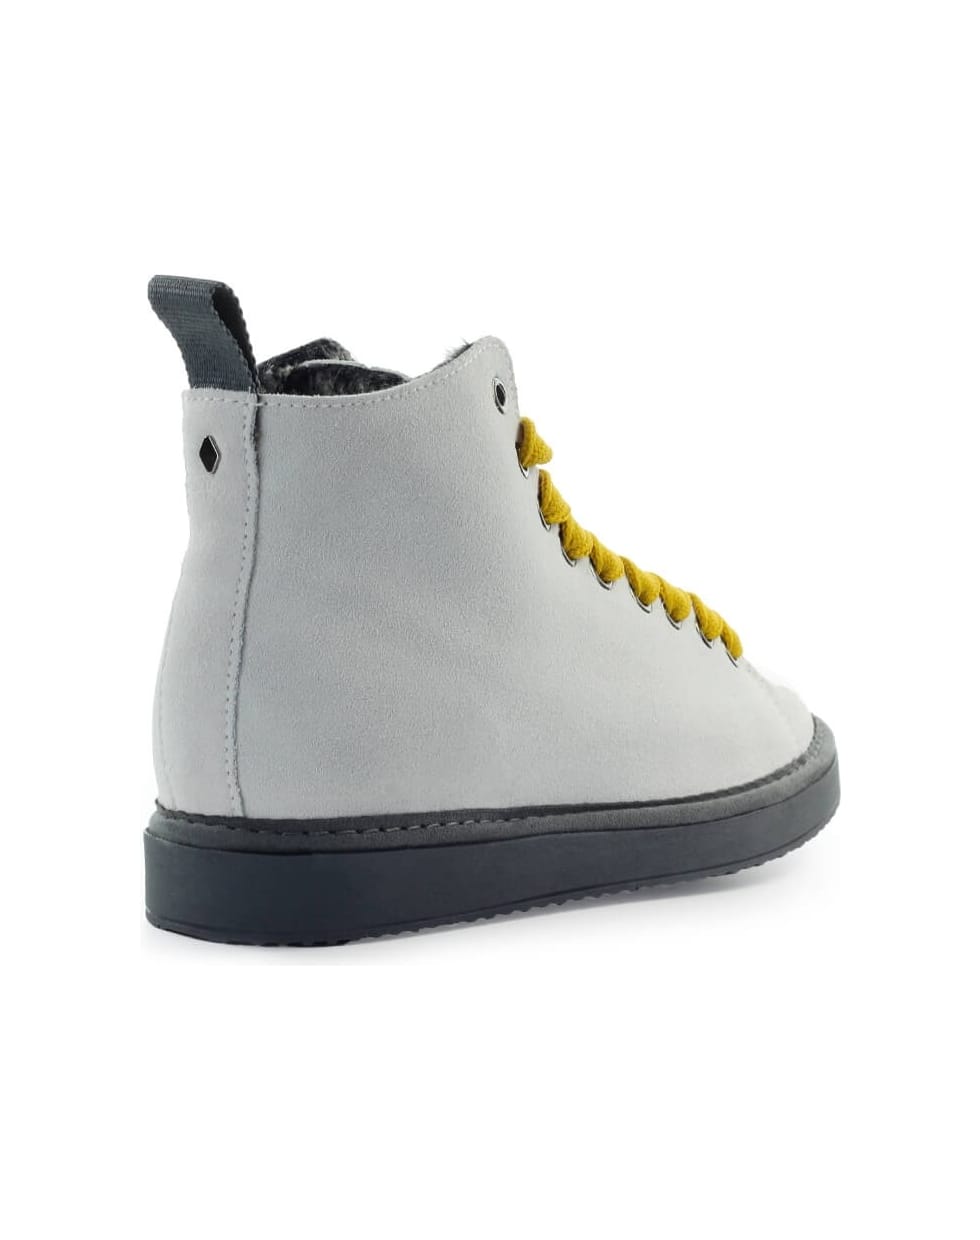 Panchic White Ocher Suede Ankle Boot - White/Deep Yellow